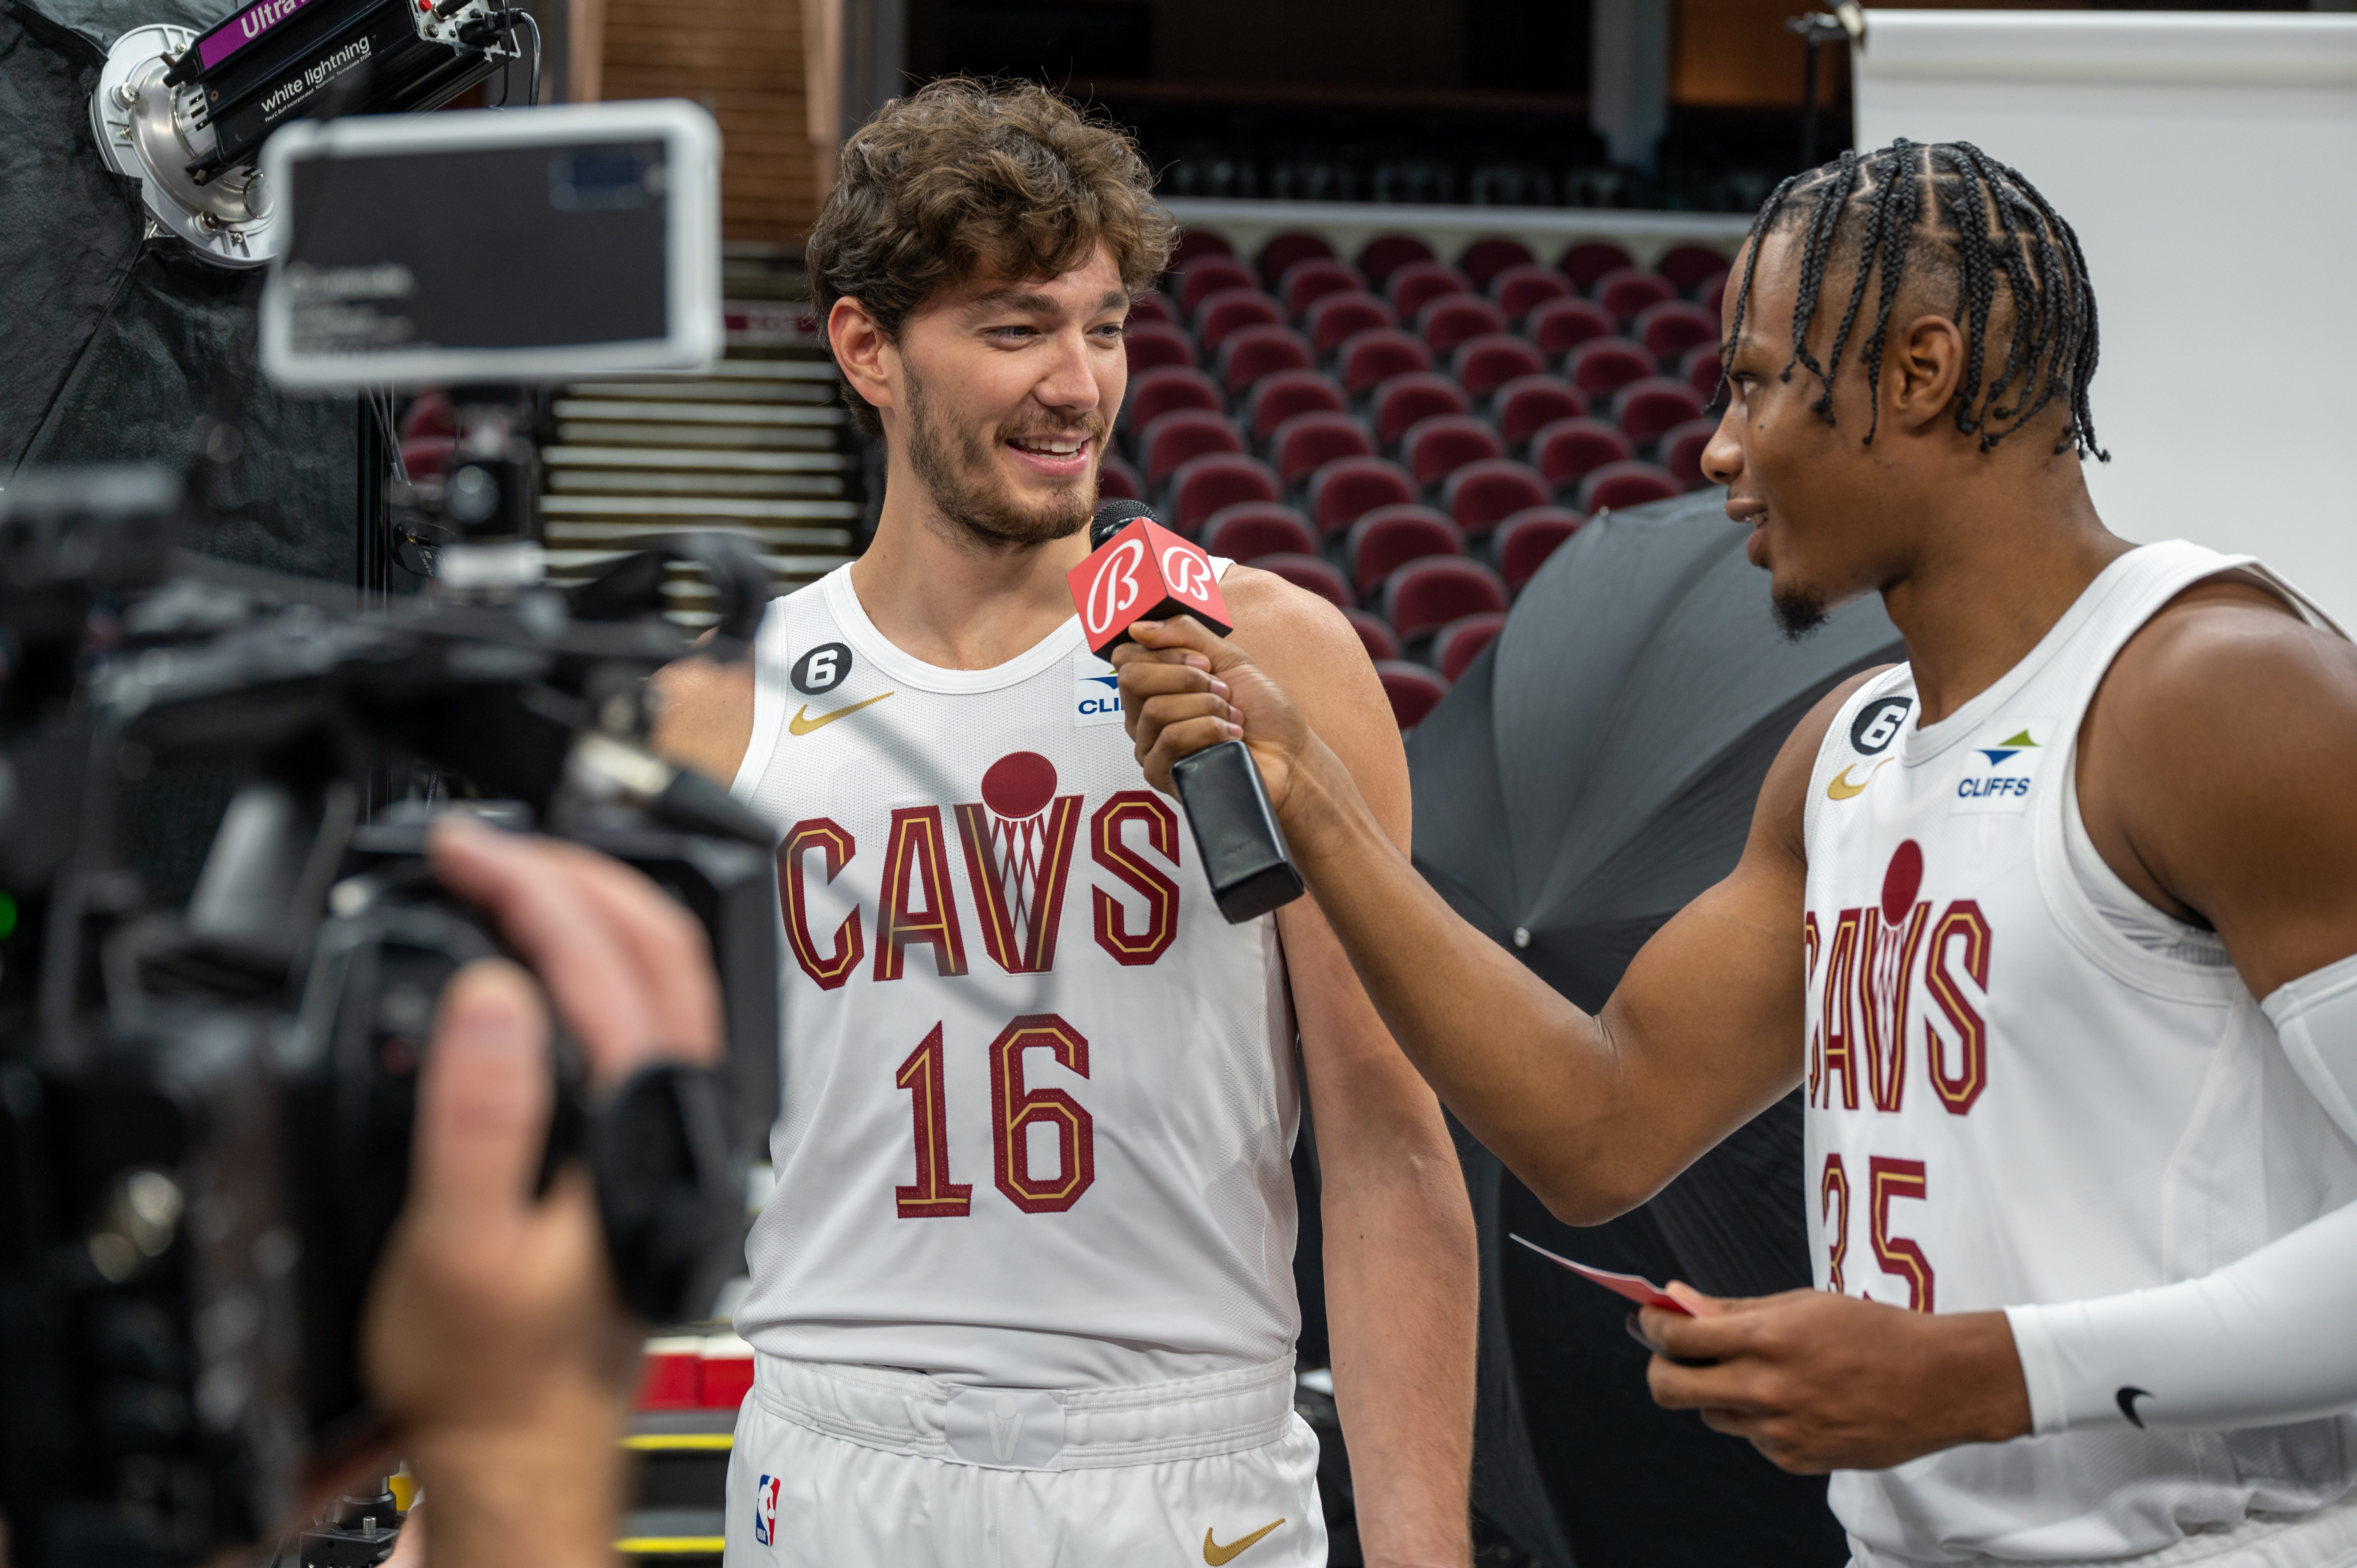 Cleveland Cavaliers Media Day